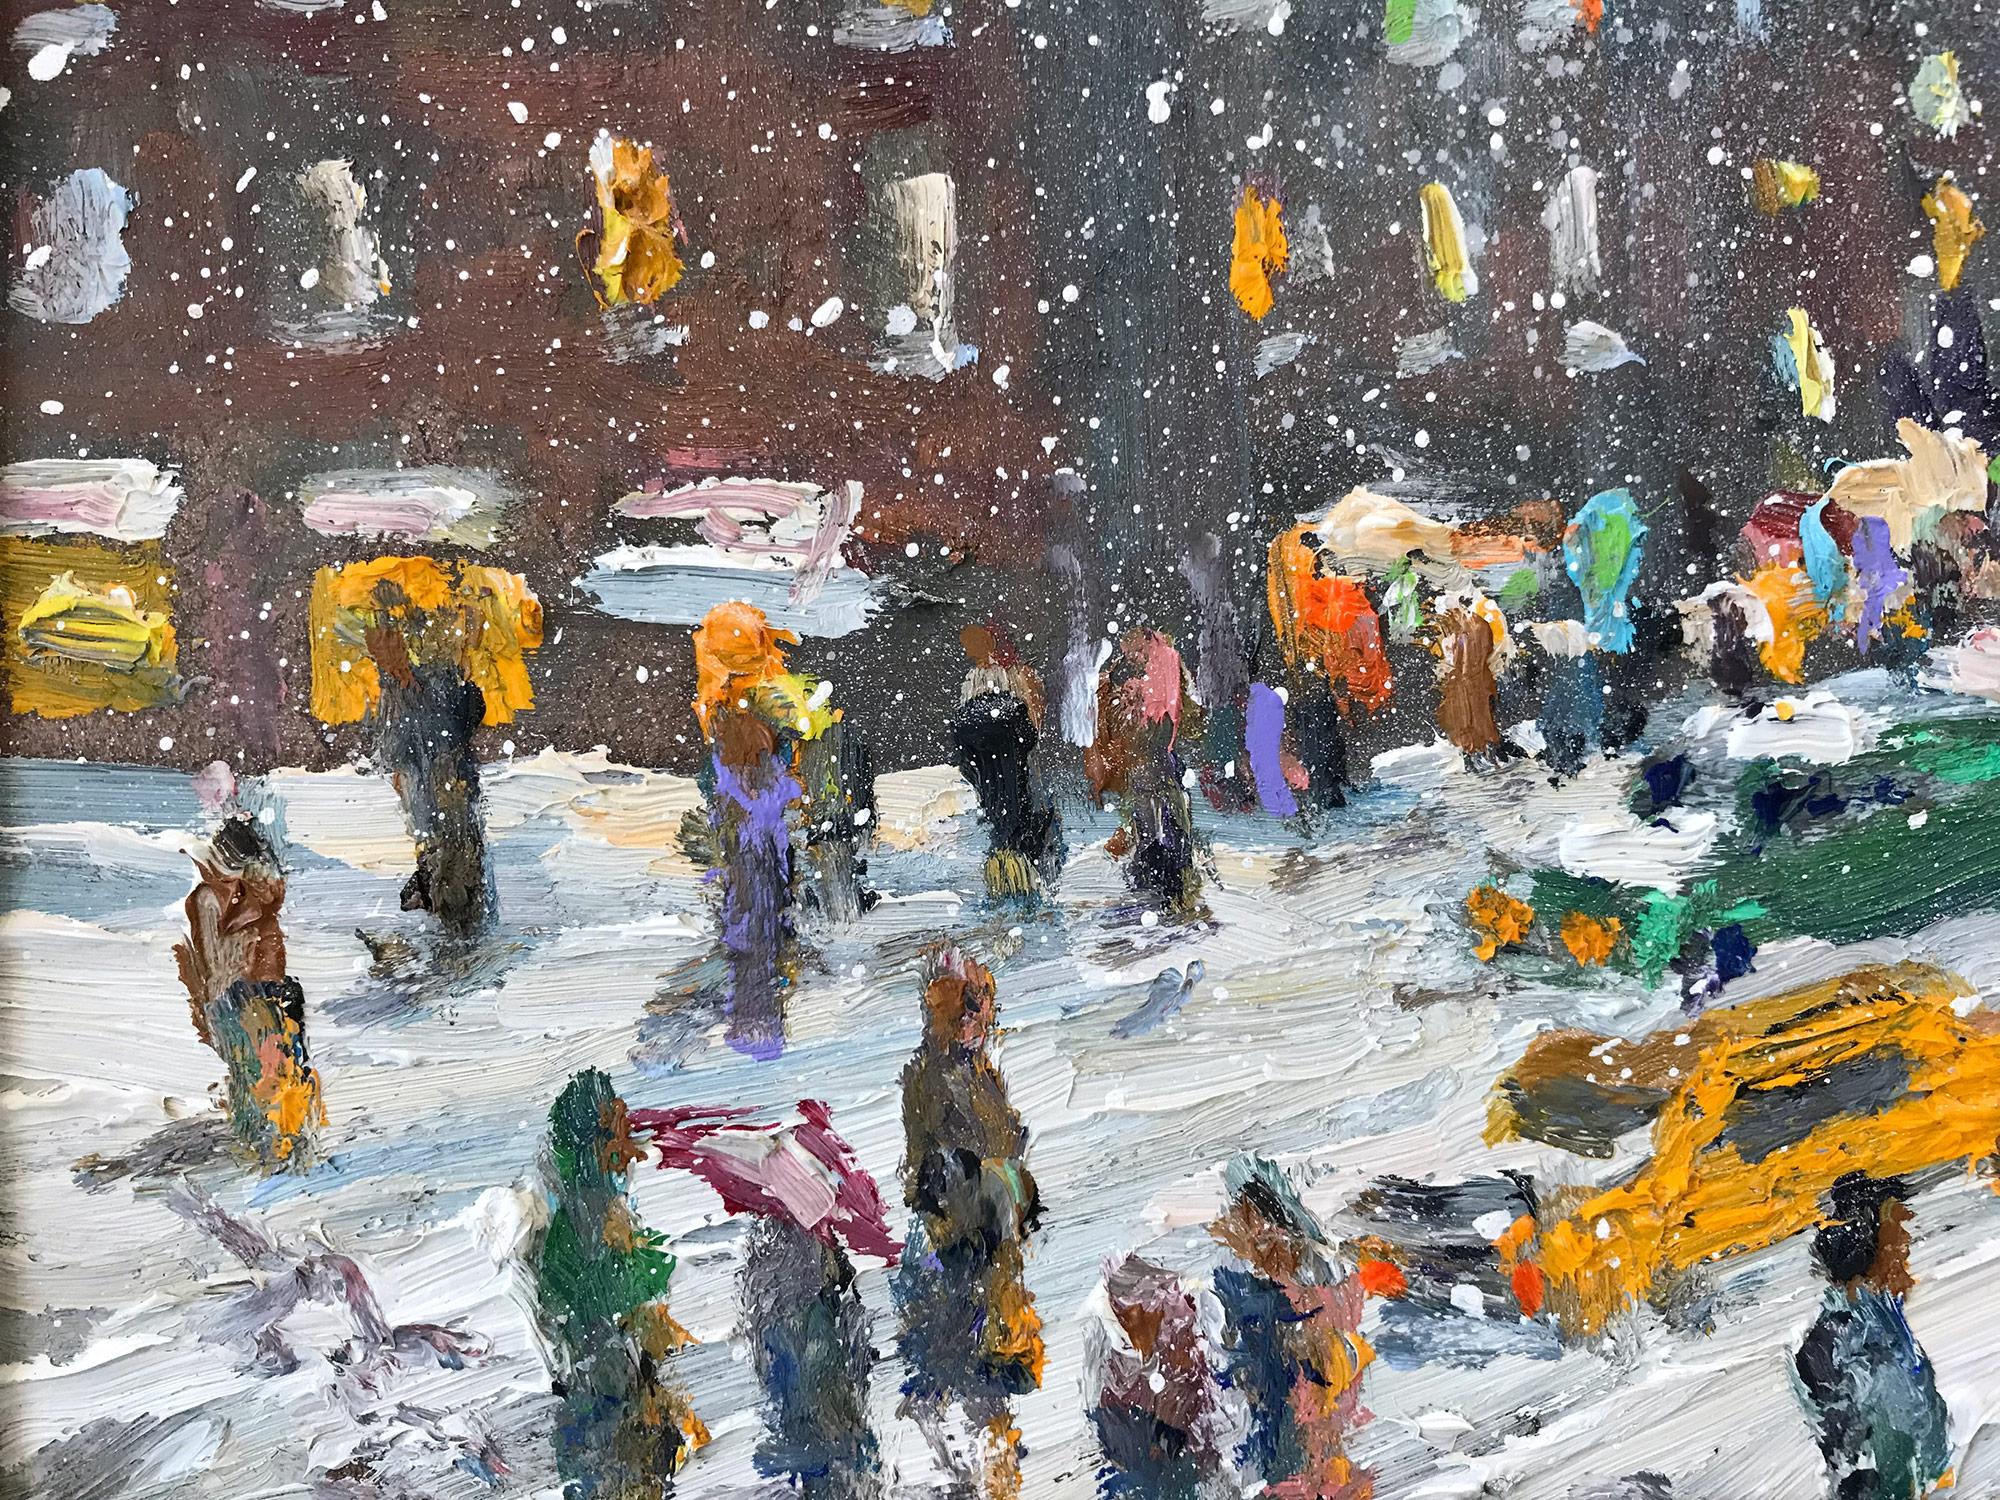 A scene of iconic New York City depicting a snowstorm in a most intimate, yet energetic way. Christopher is known for capturing the beauty and simplicity of an earlier time of the 20th Century; old New York, families working together, villages and